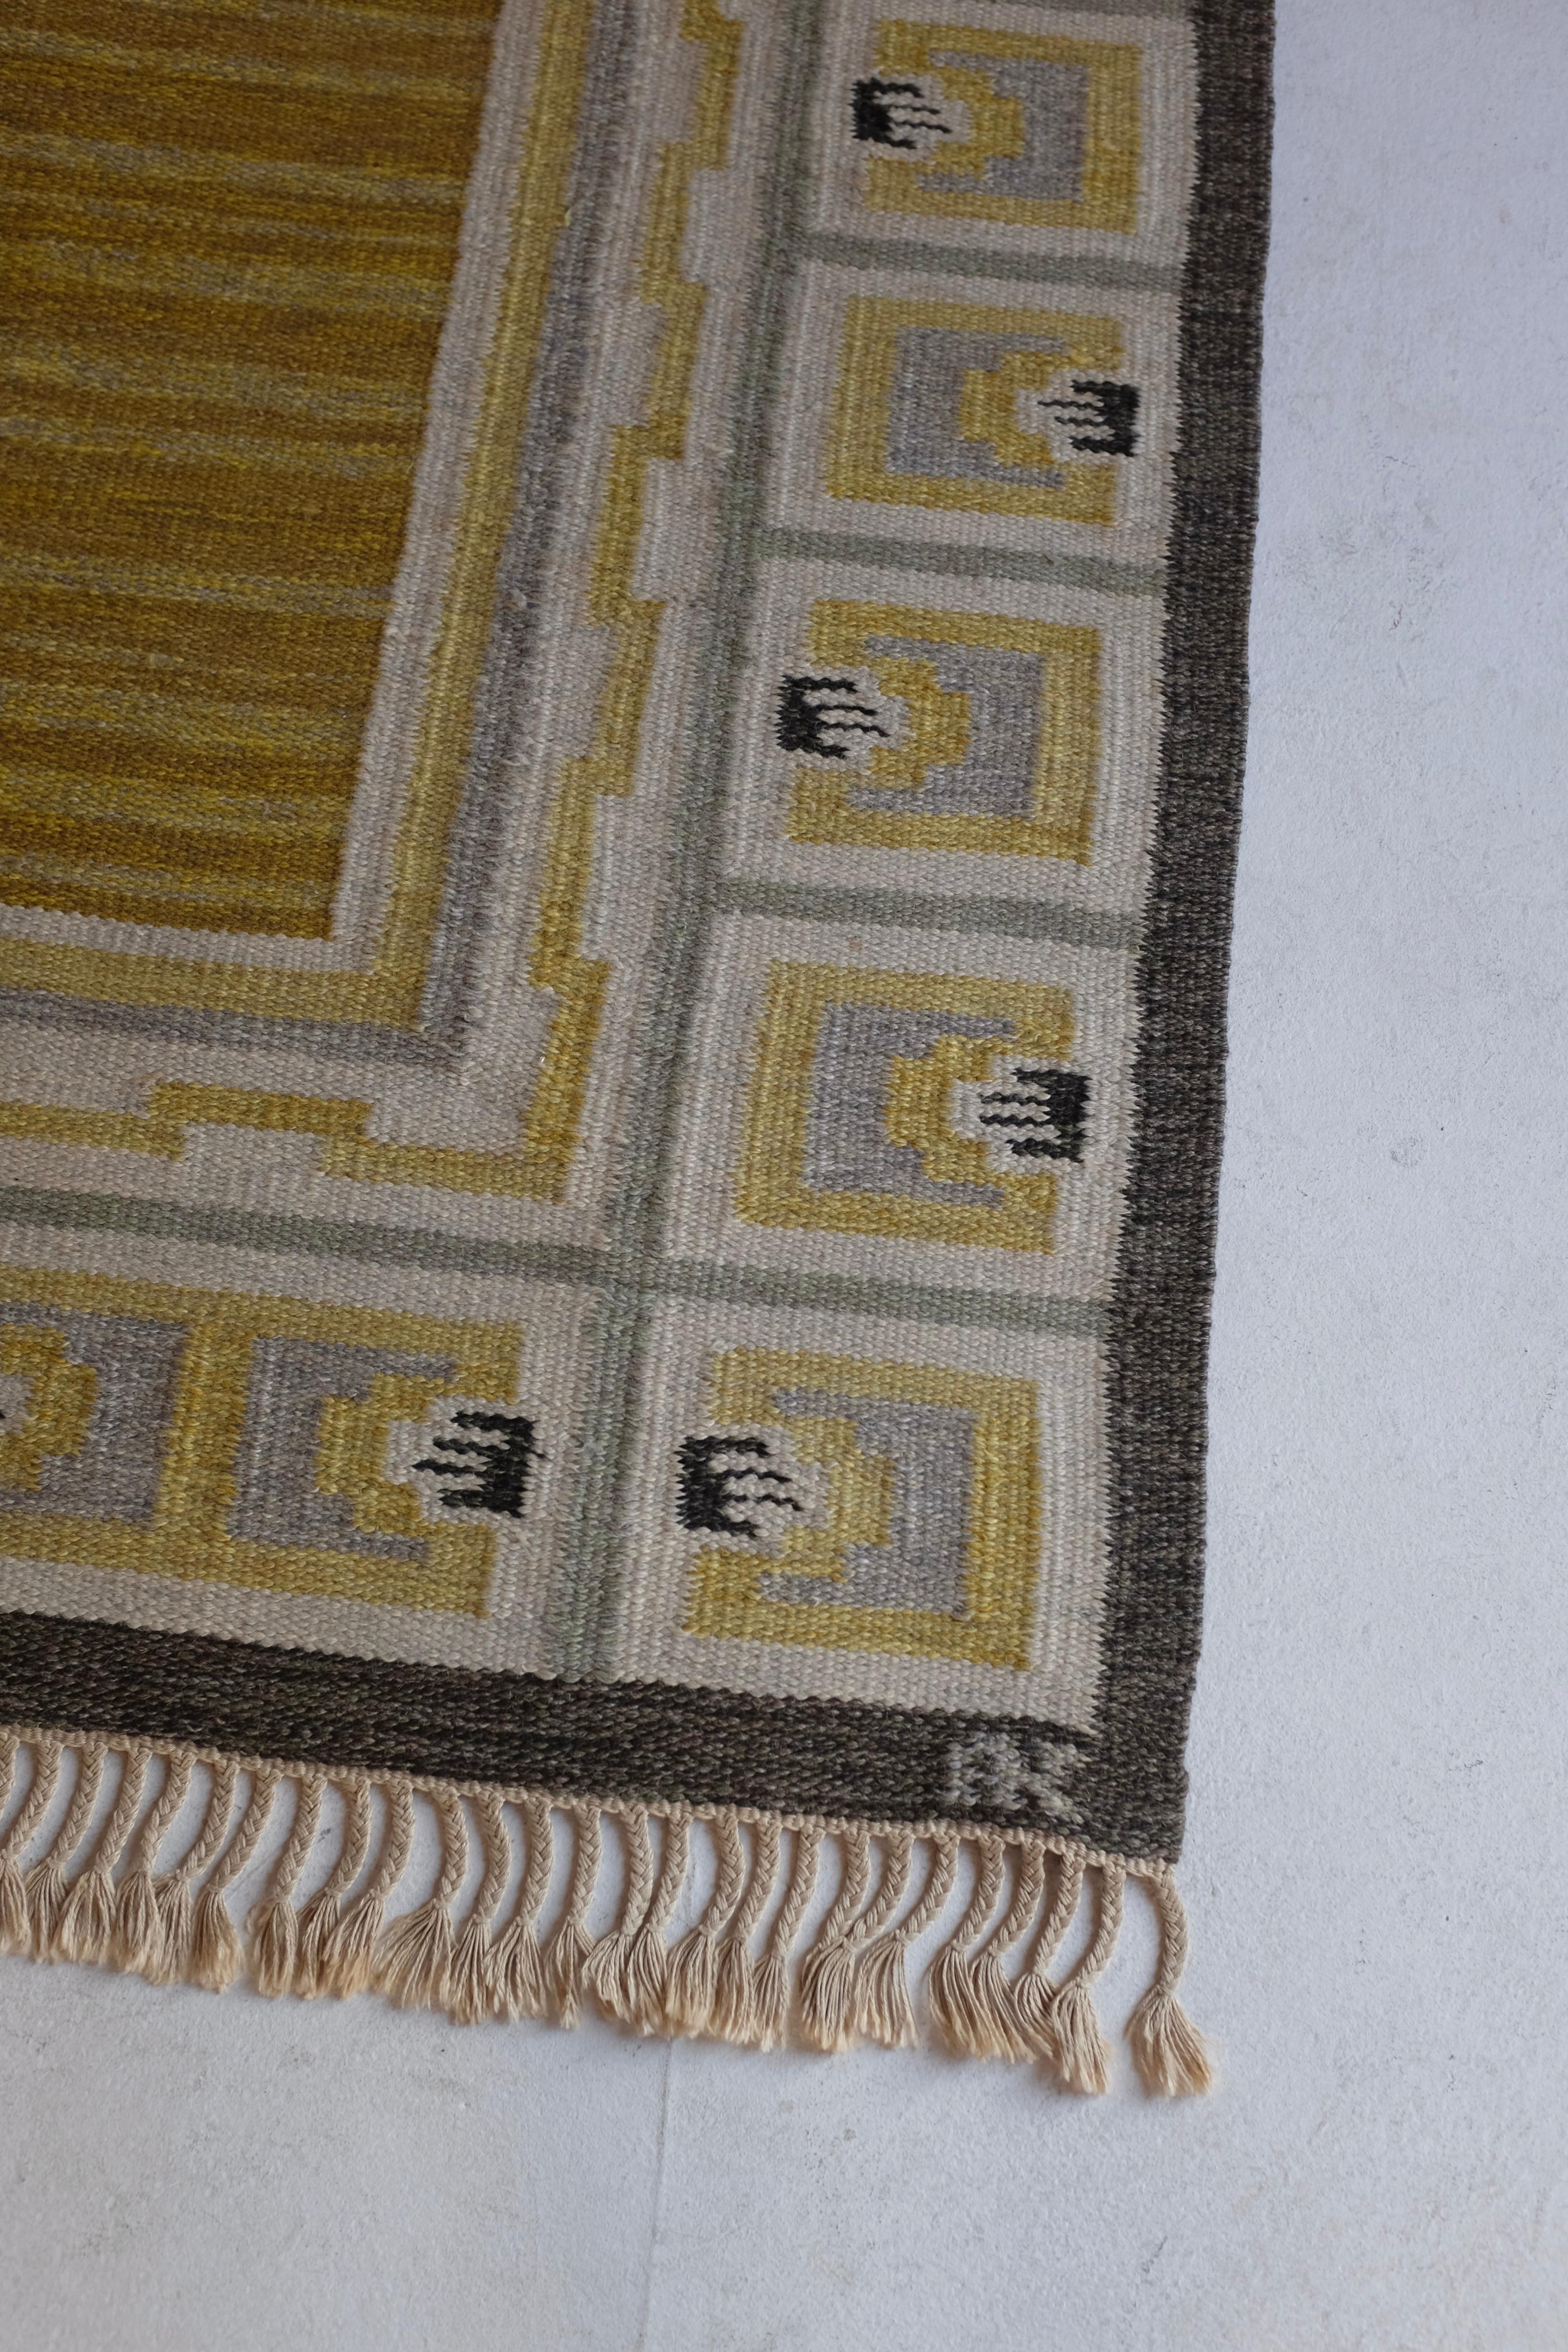 1940's Swedish Rug by Aina Kånge In Good Condition For Sale In Brooklyn, NY